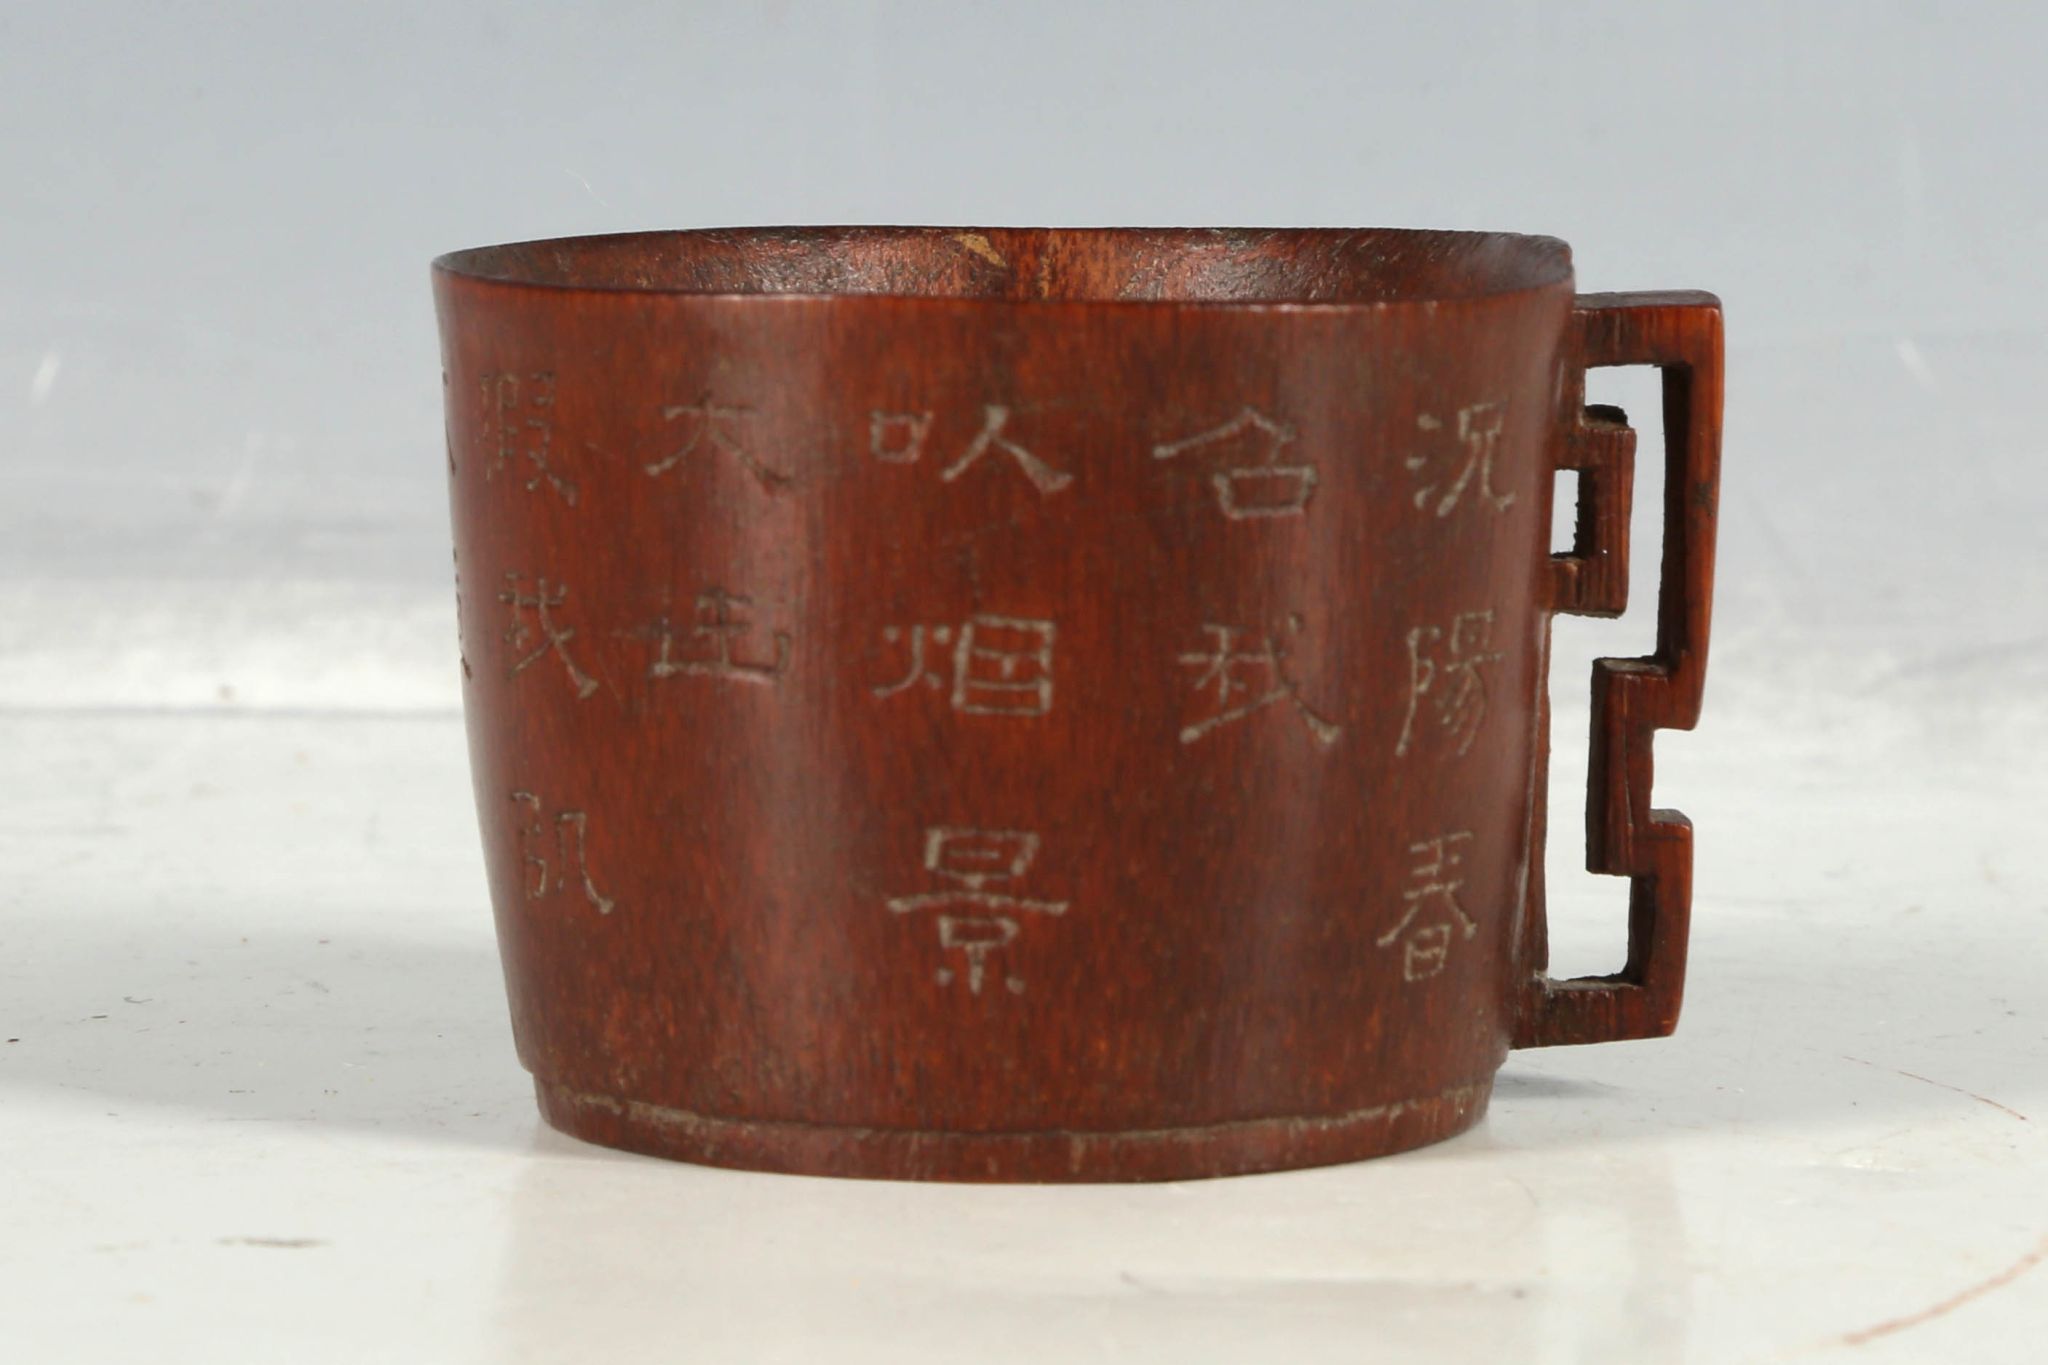 A Chinese bamboo carved cup with a decorative carved handle and calligraphic inscriptions around the - Image 3 of 4